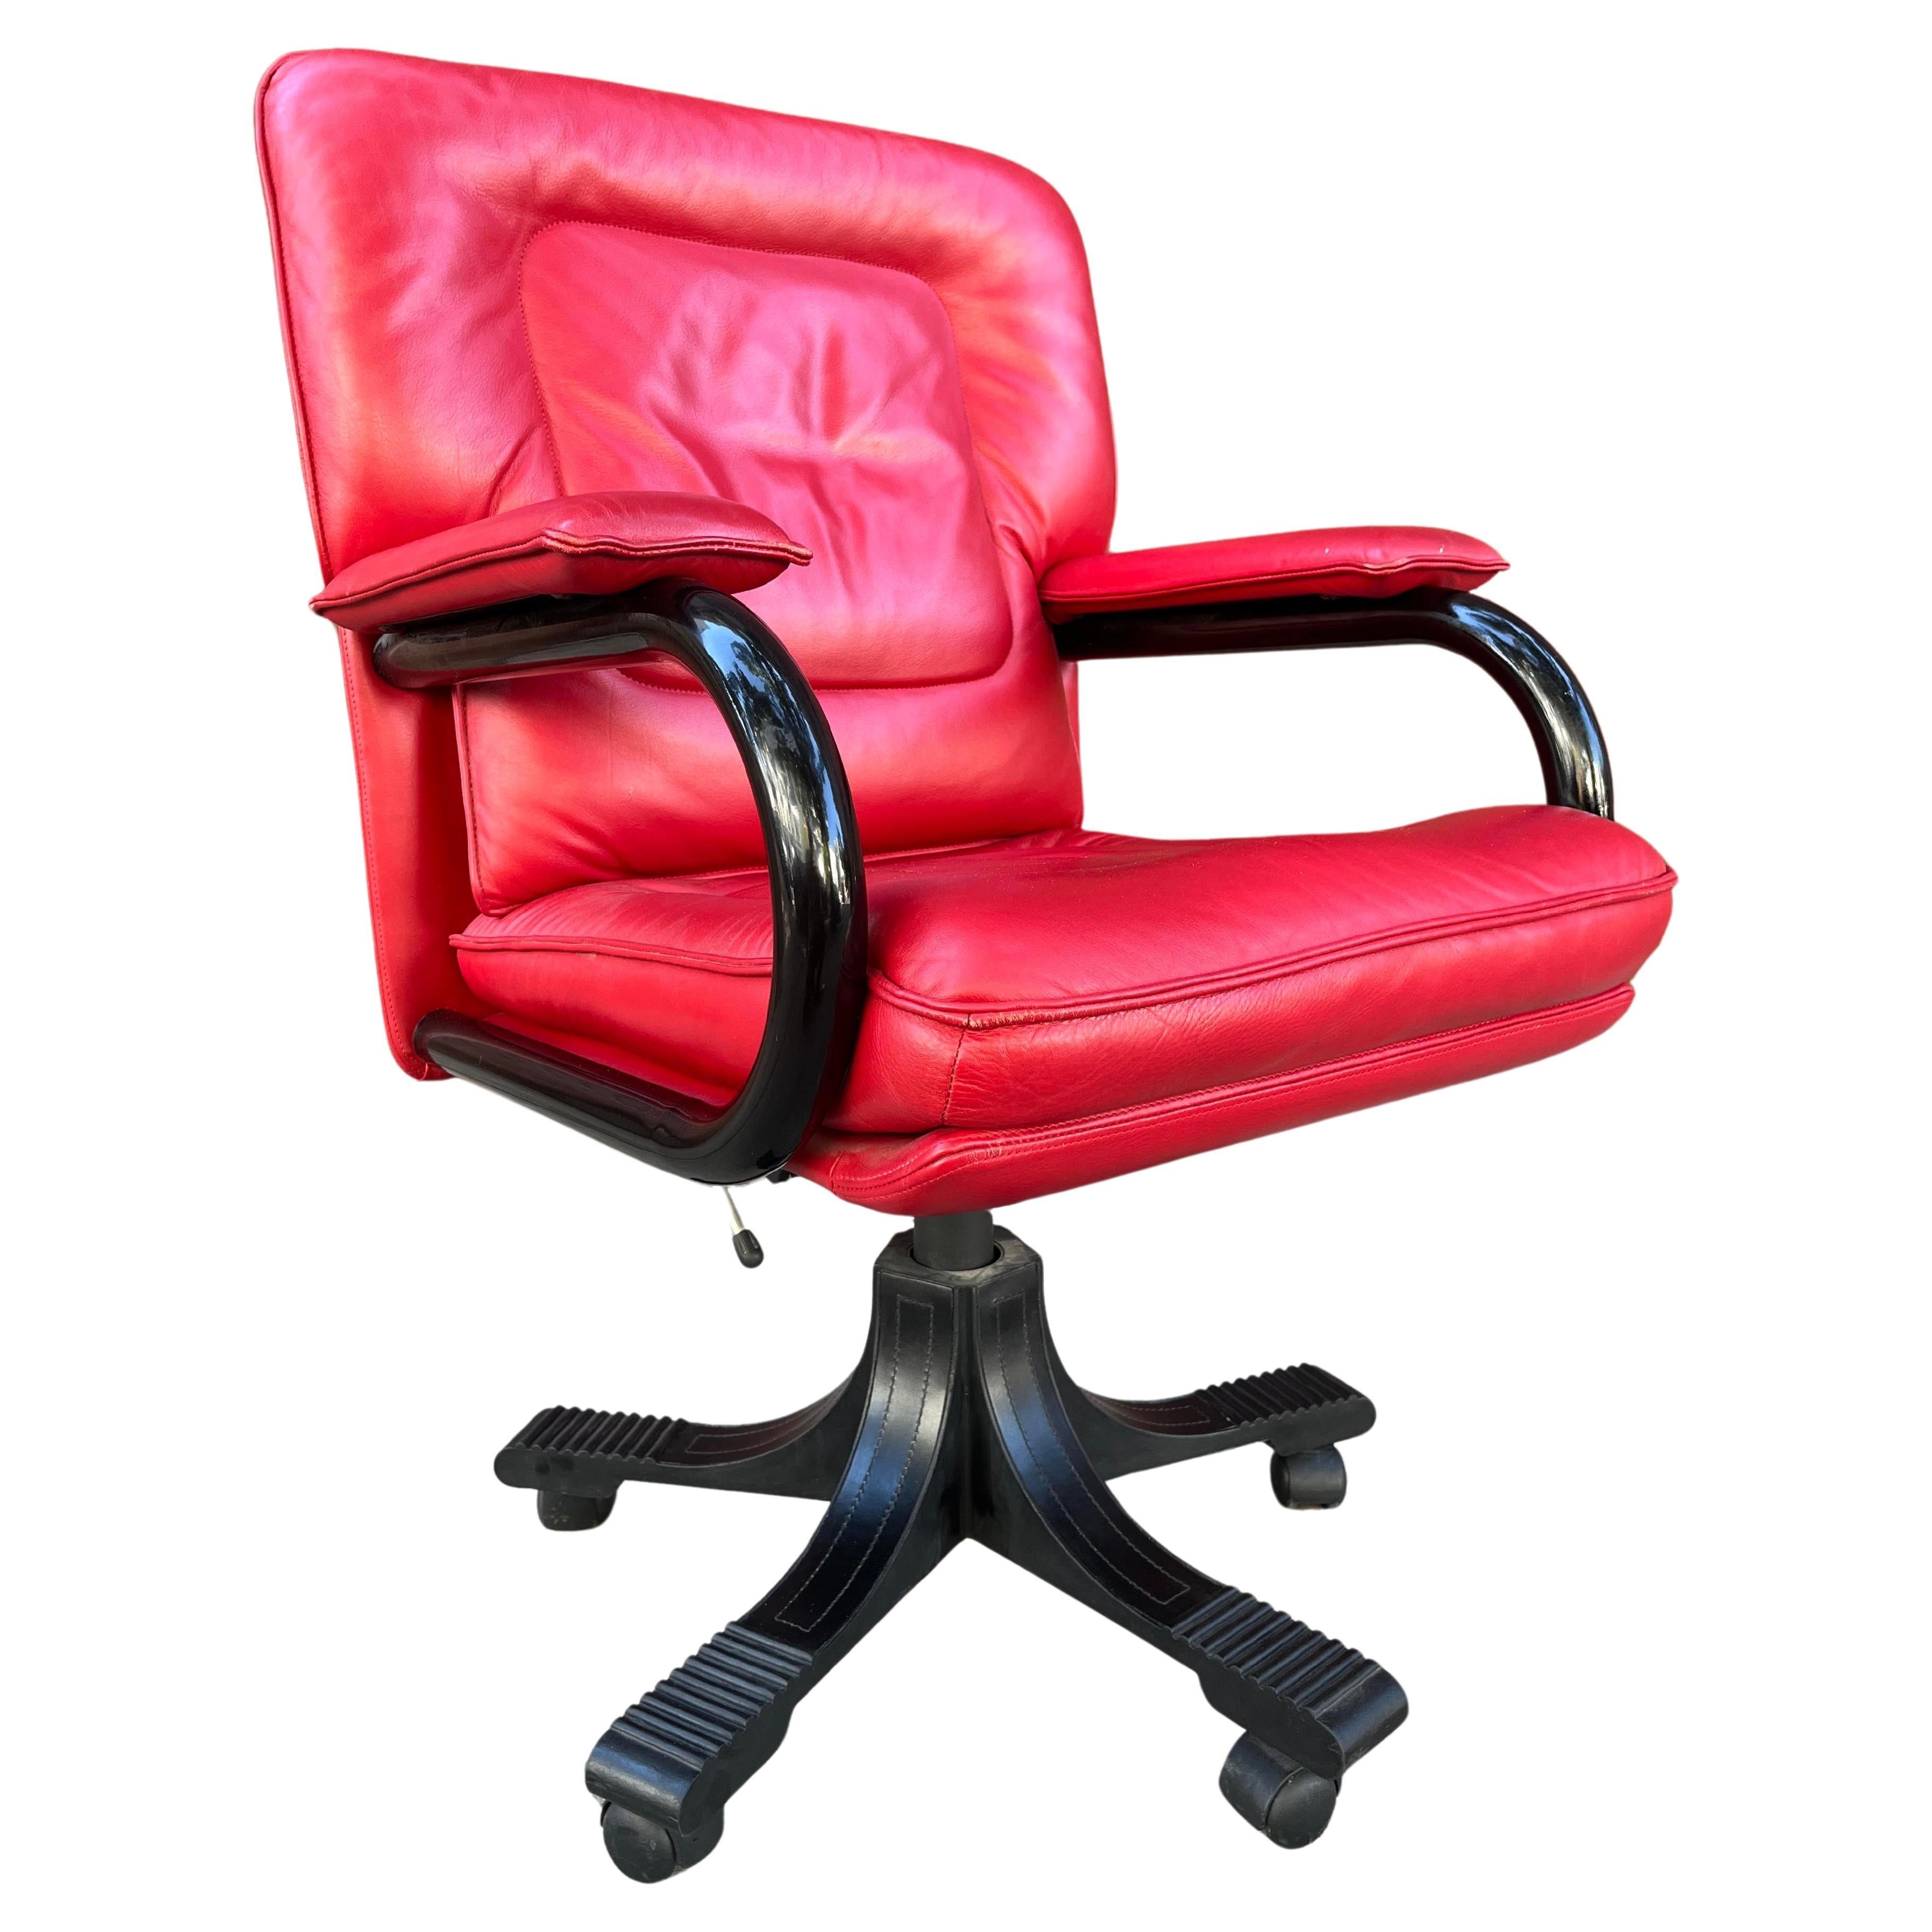 Stunning and luxurious Pace leather Executive Chair For Sale